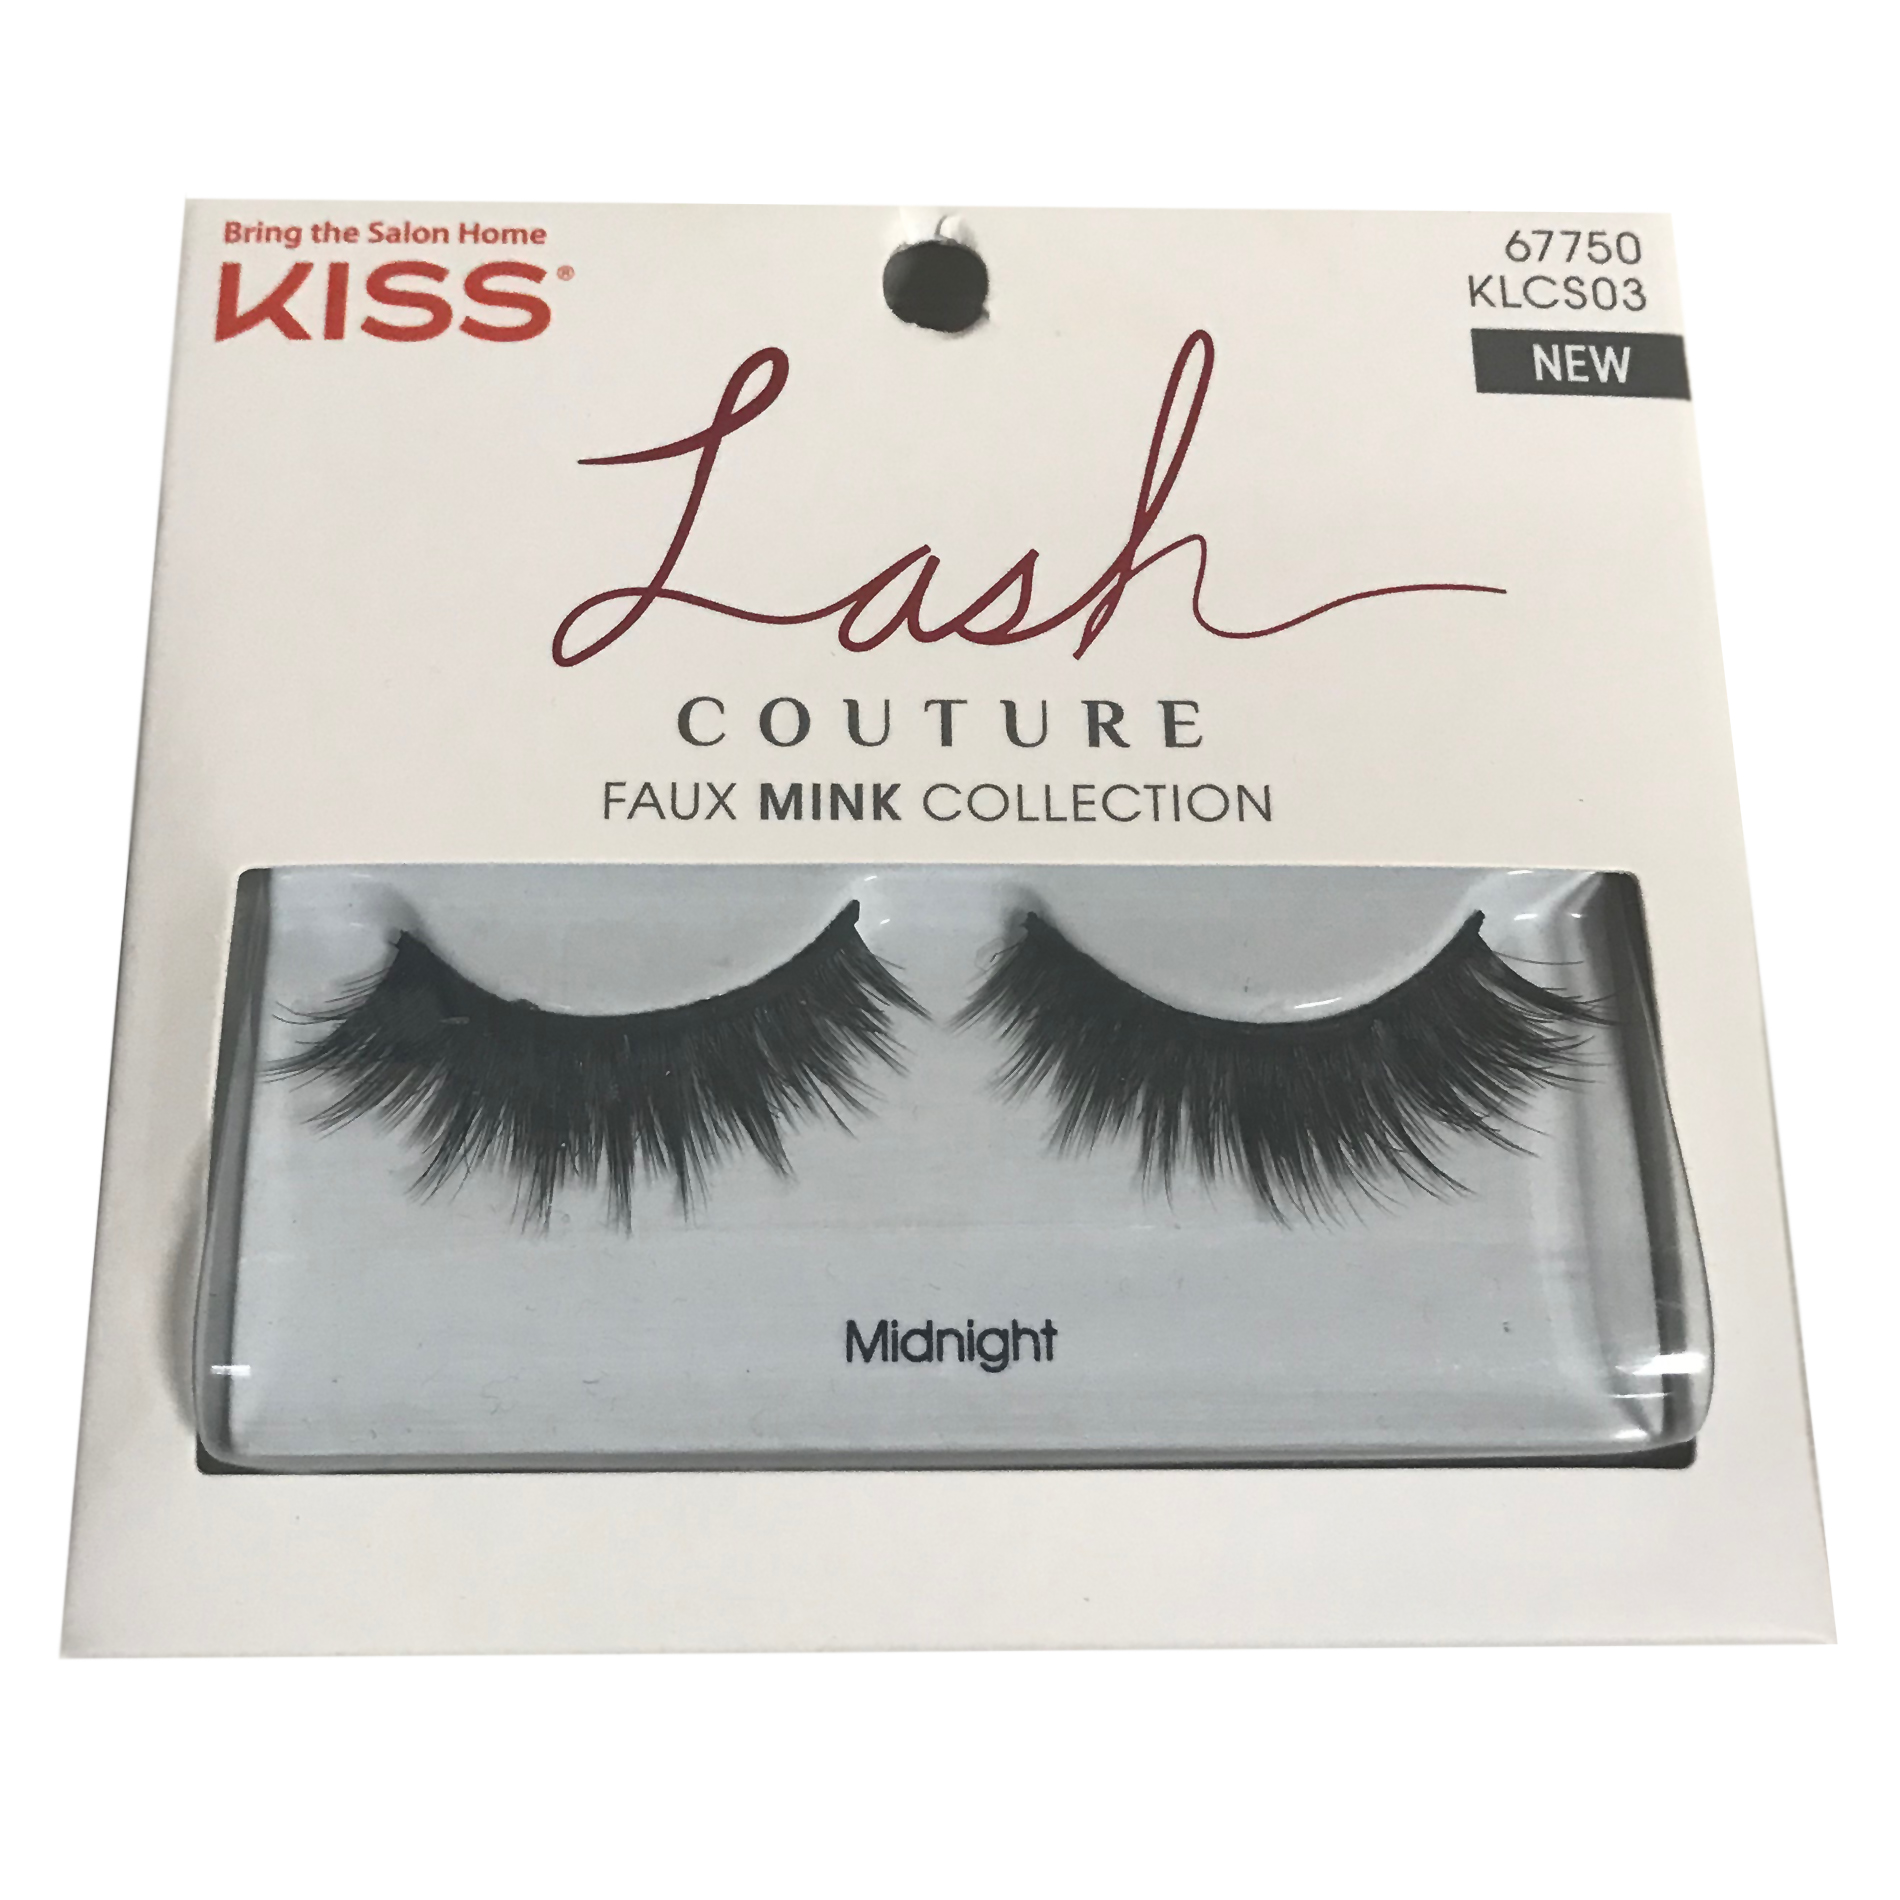 Kiss Lash Couture Faux Mink Collection, Single Pack - Midnight